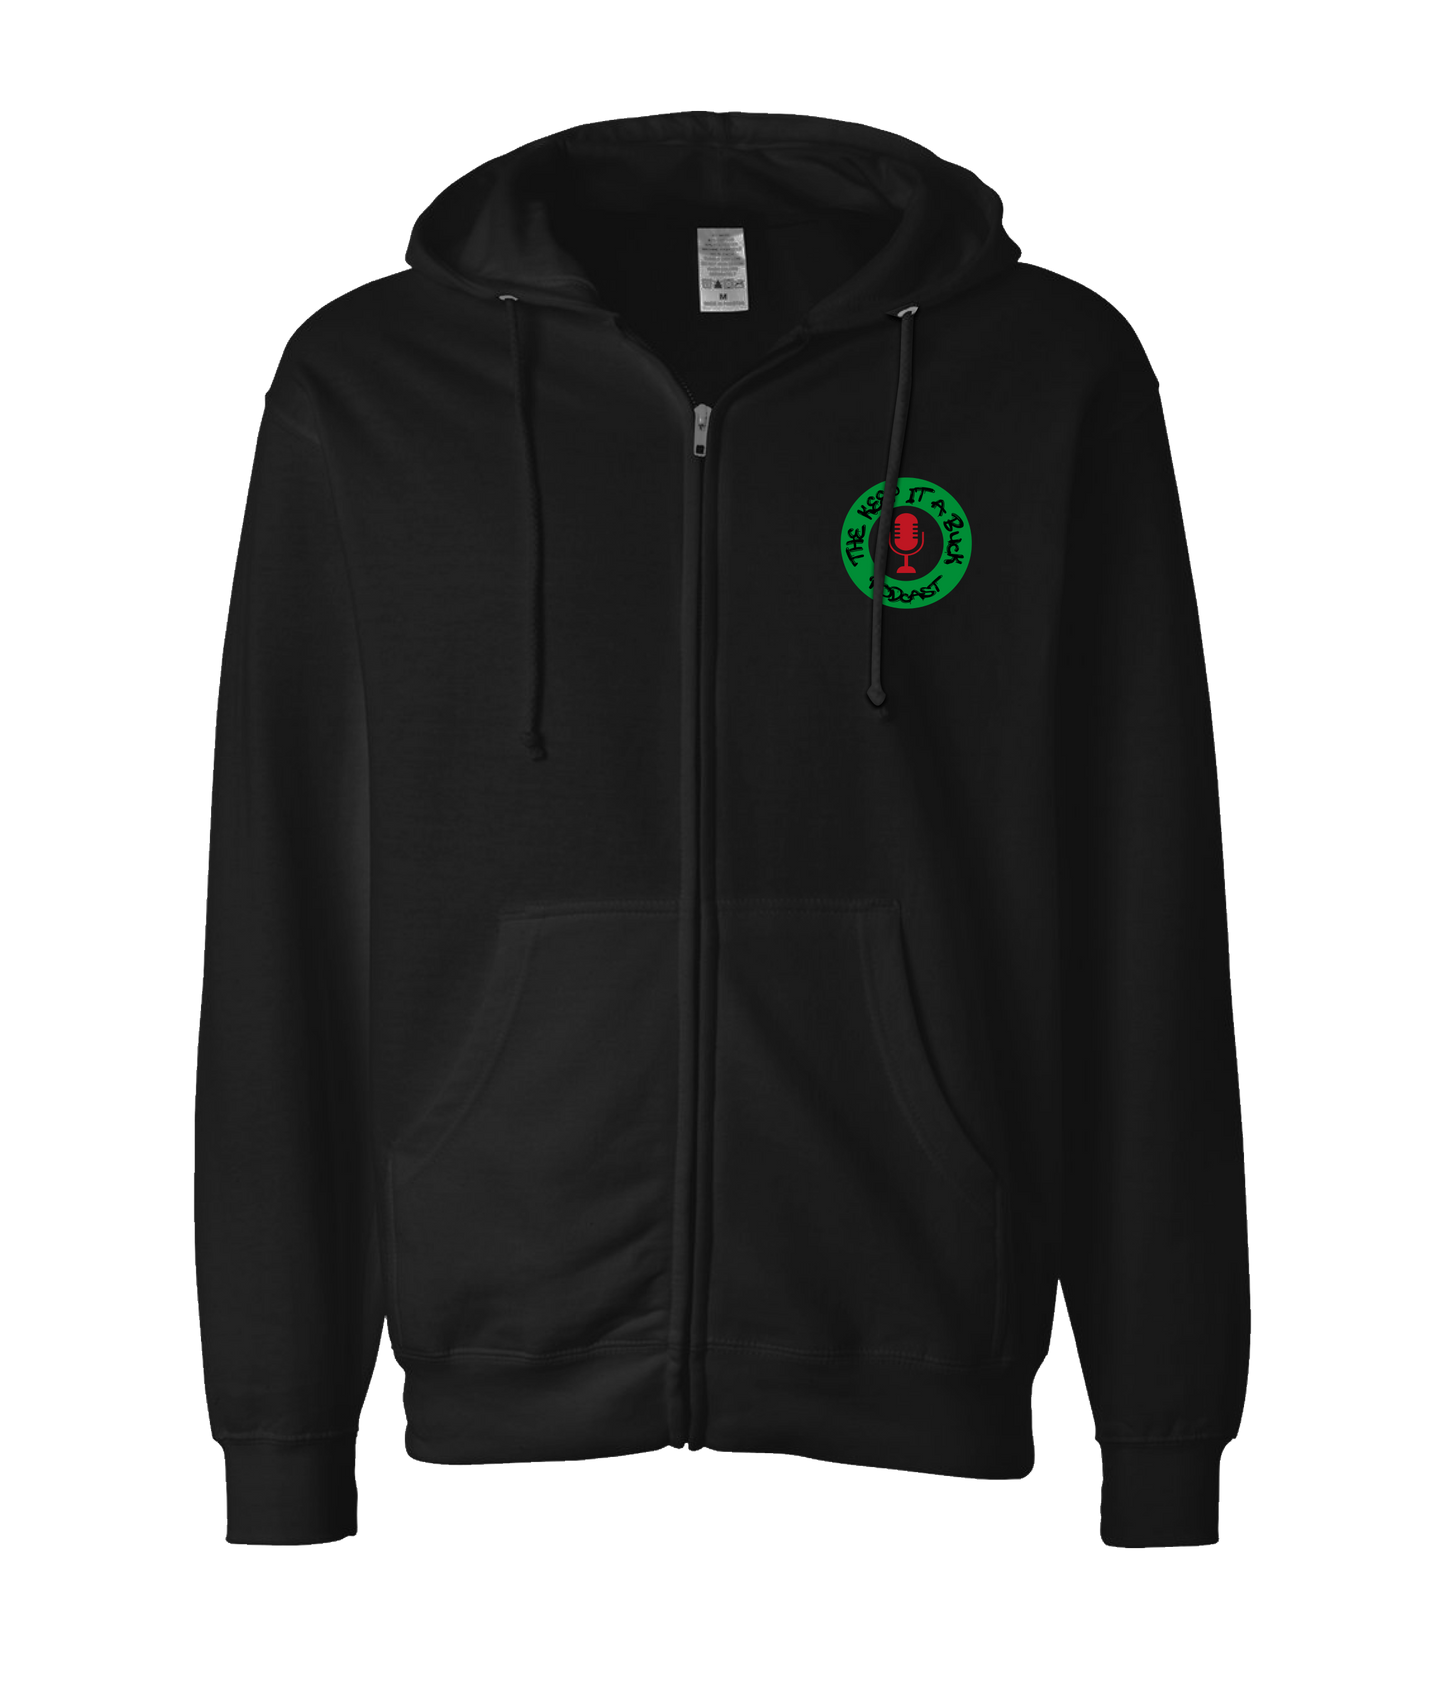 The Buck Store - The Keep it a Buck Podcast Round Logo - Black Zip Up Hoodie